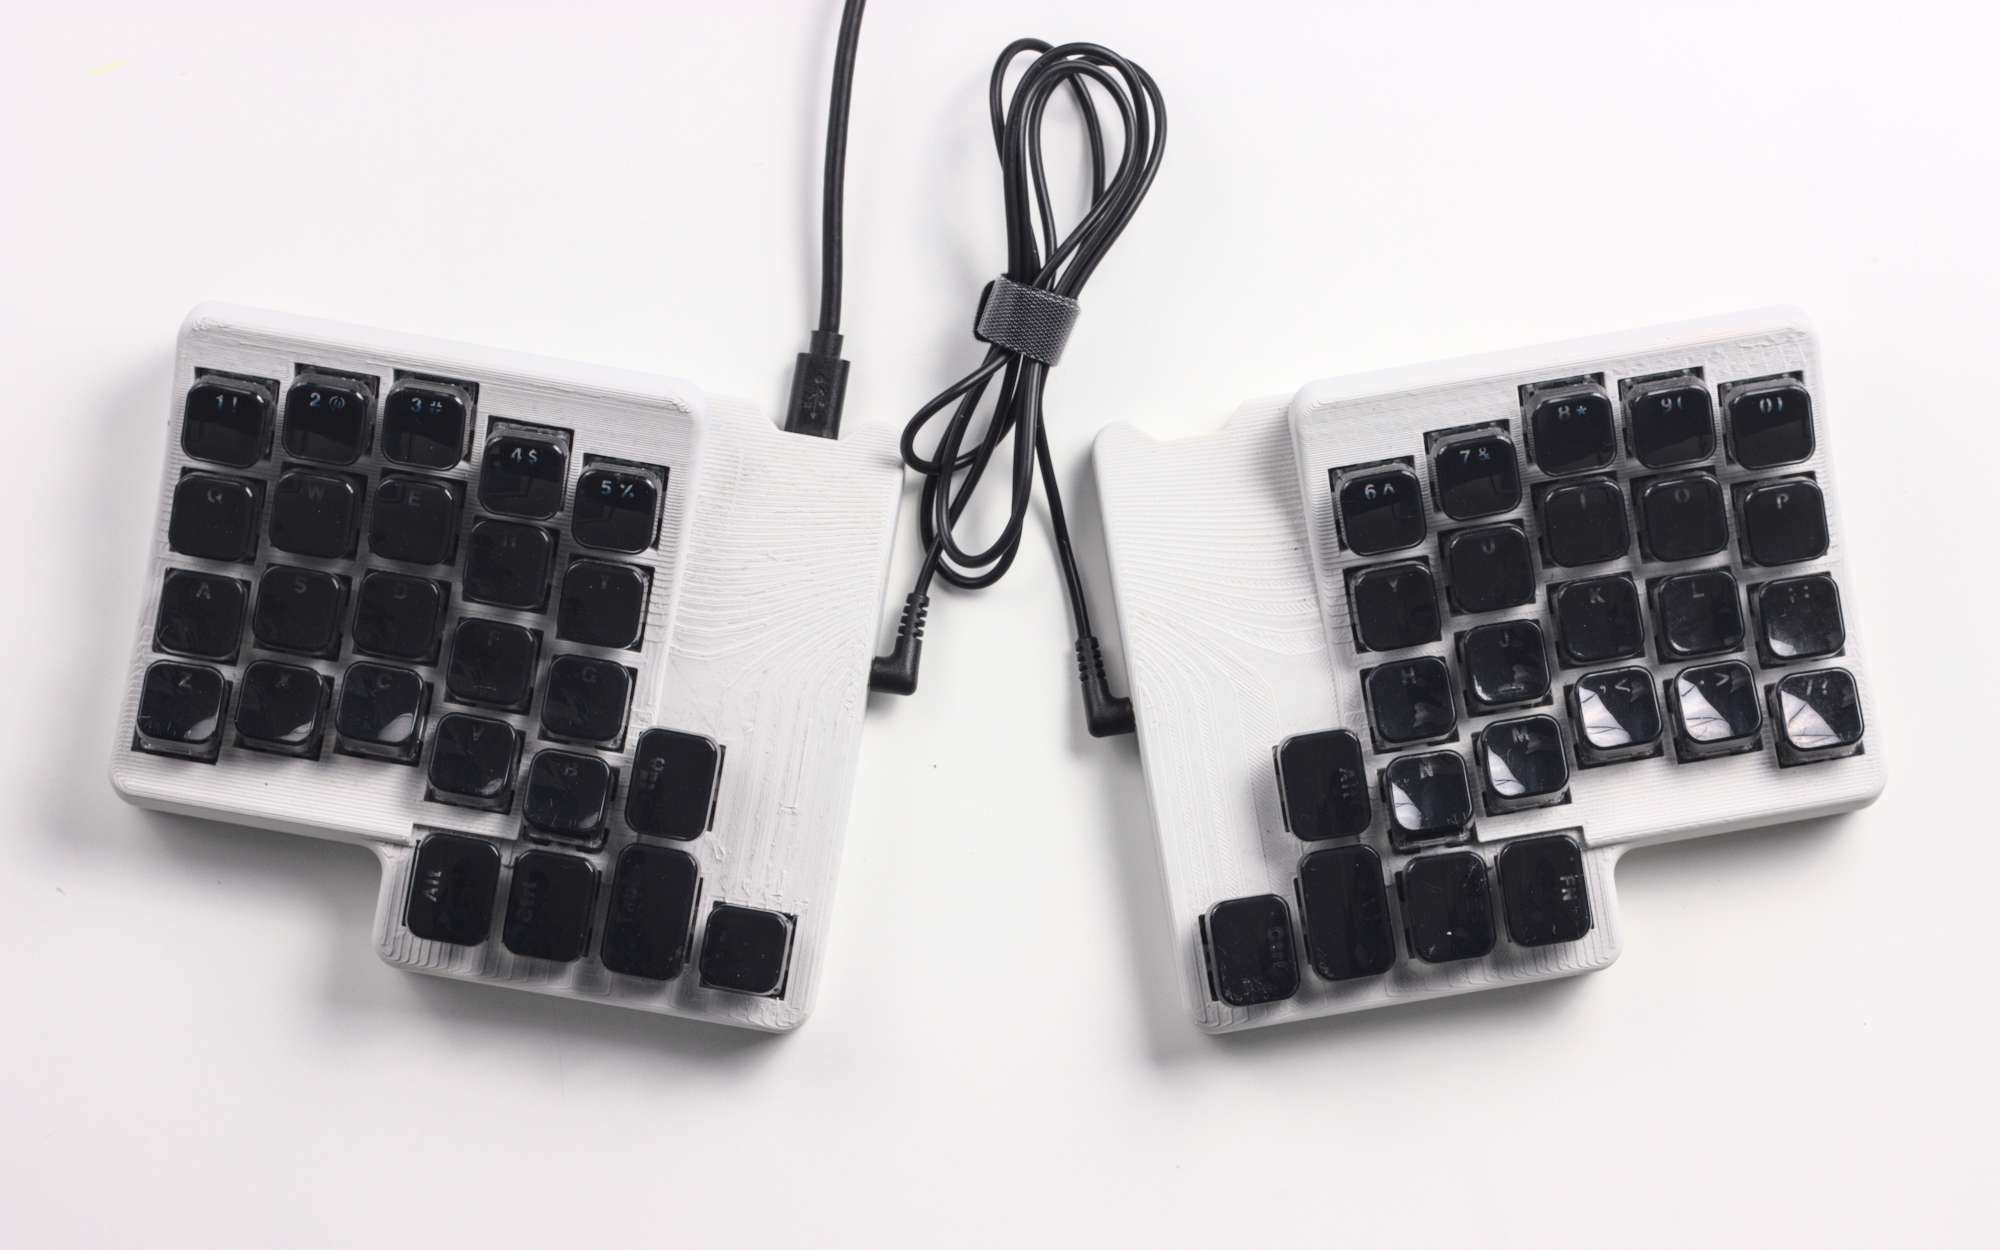 Keyboard with two halves joined by a small cable. Each half has a light grey base and black keys